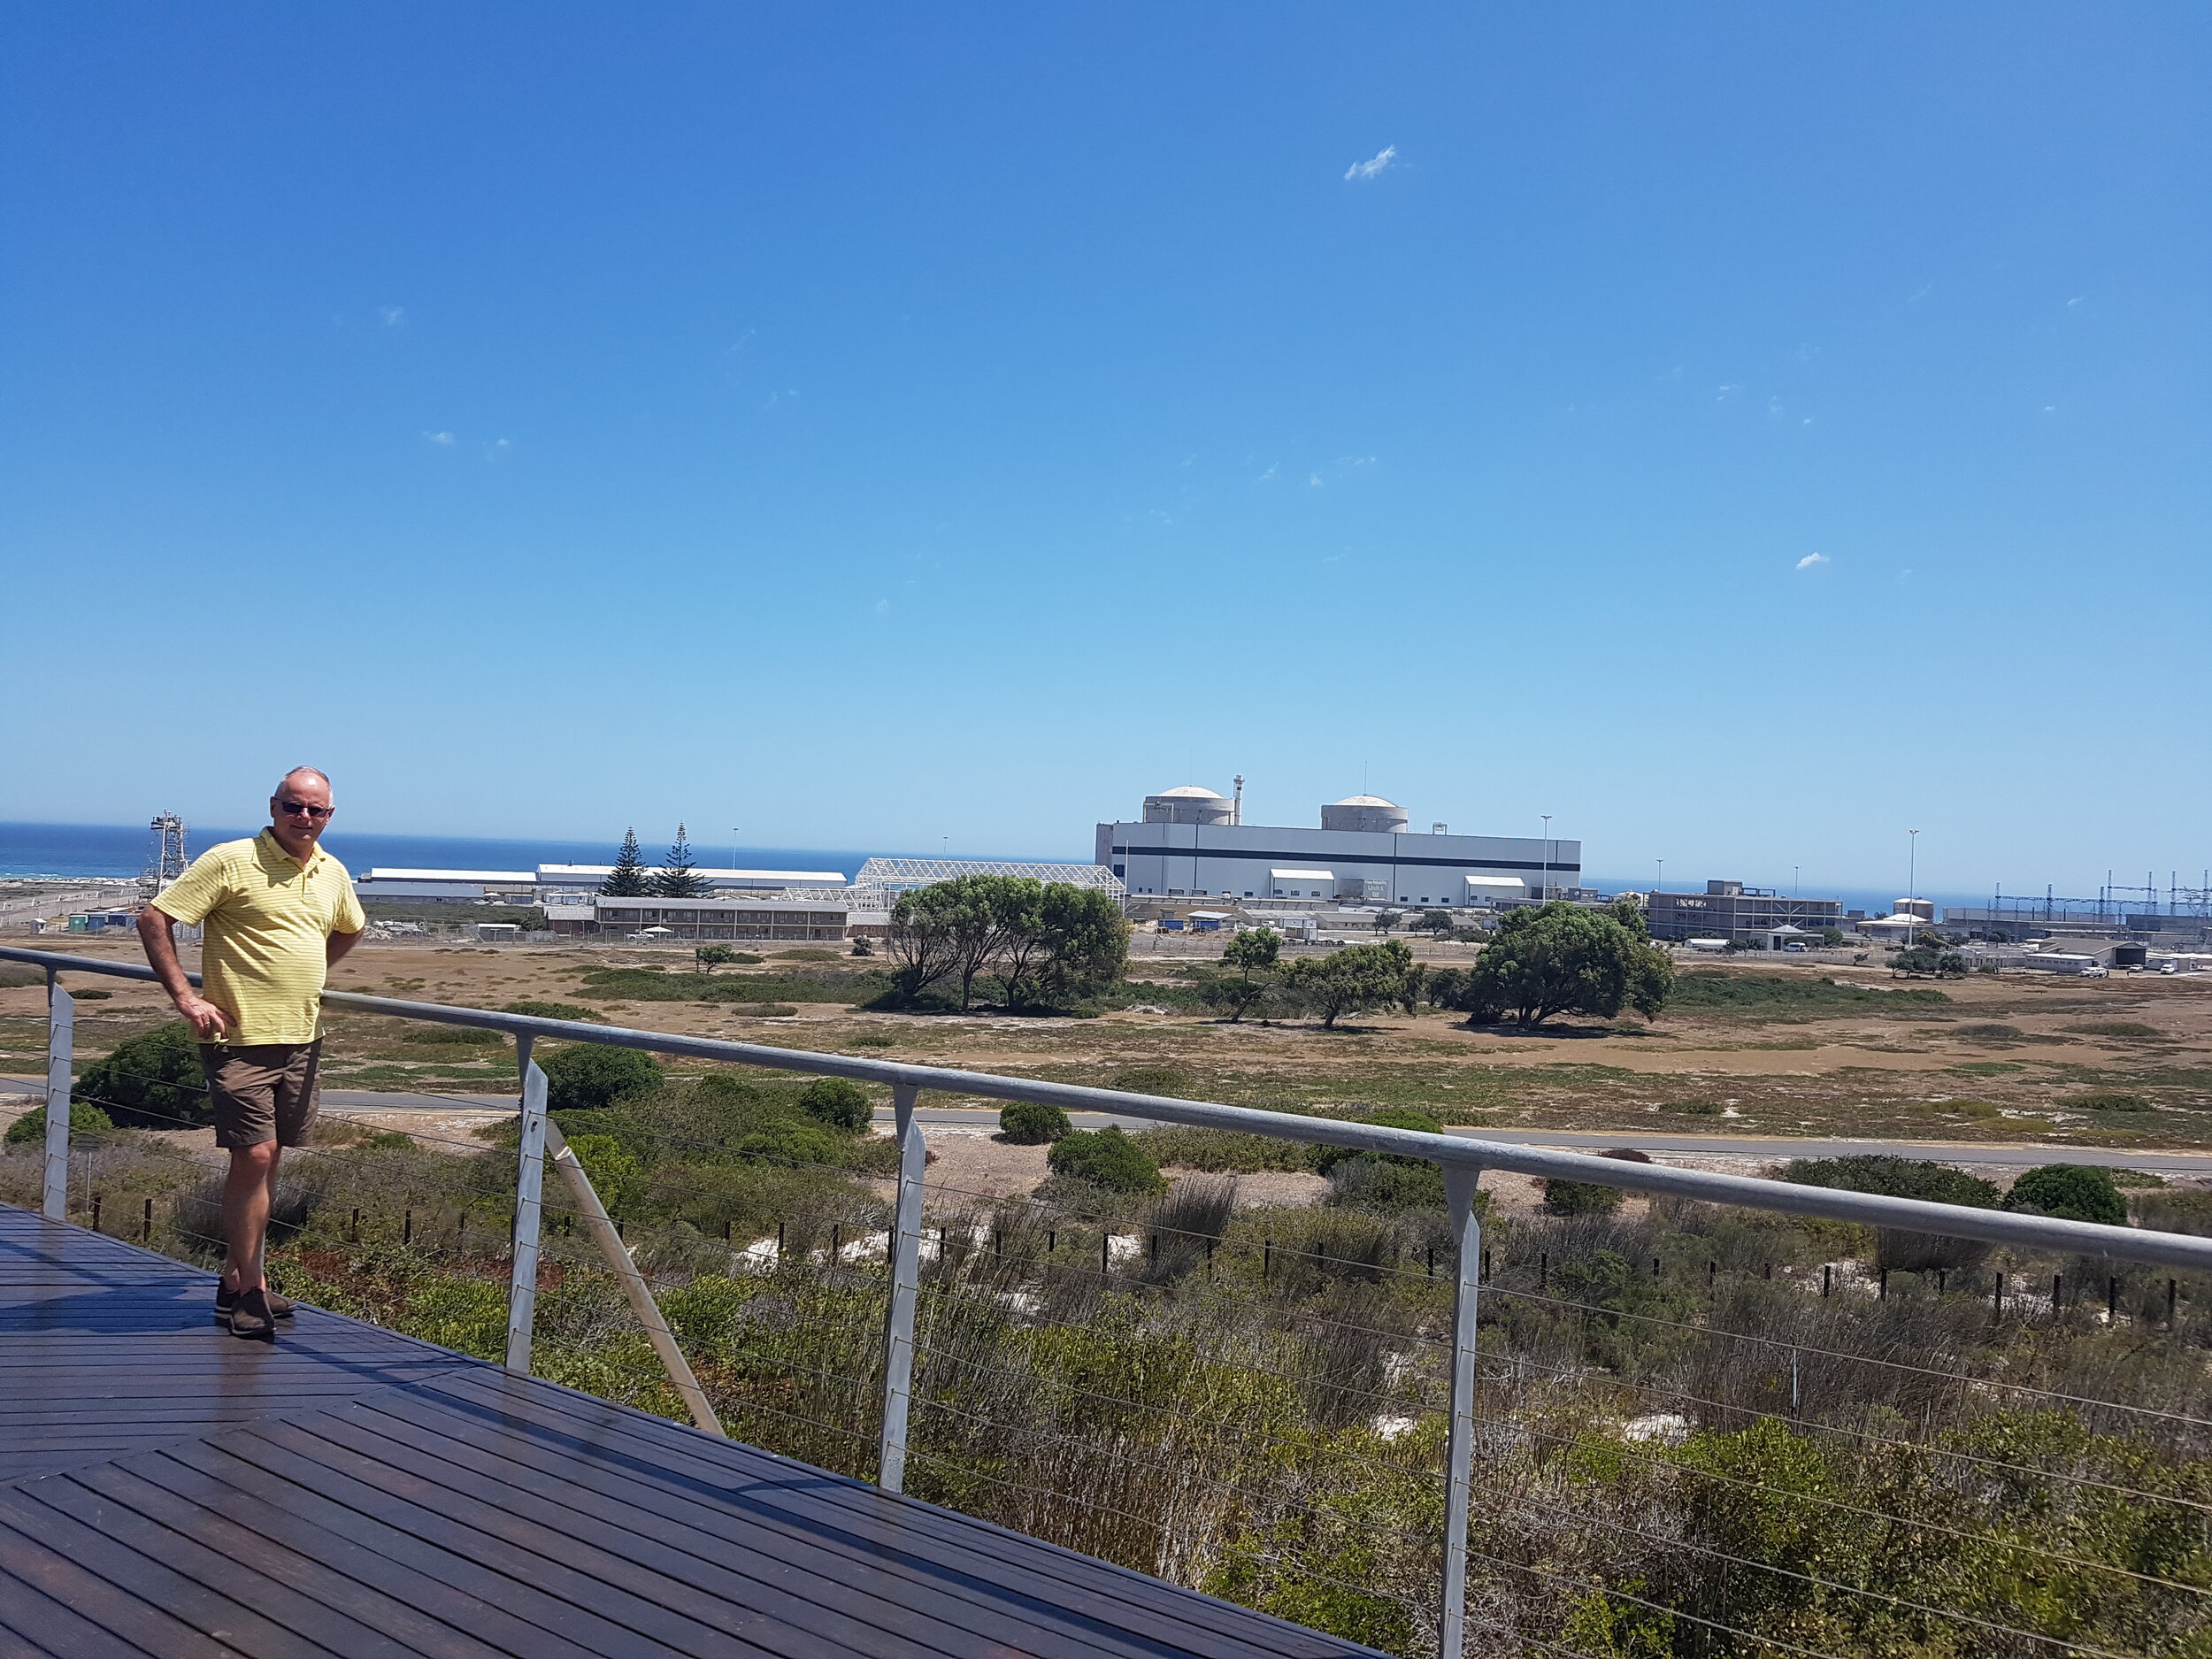 Koeberg nuclear power plant north of Cape Town